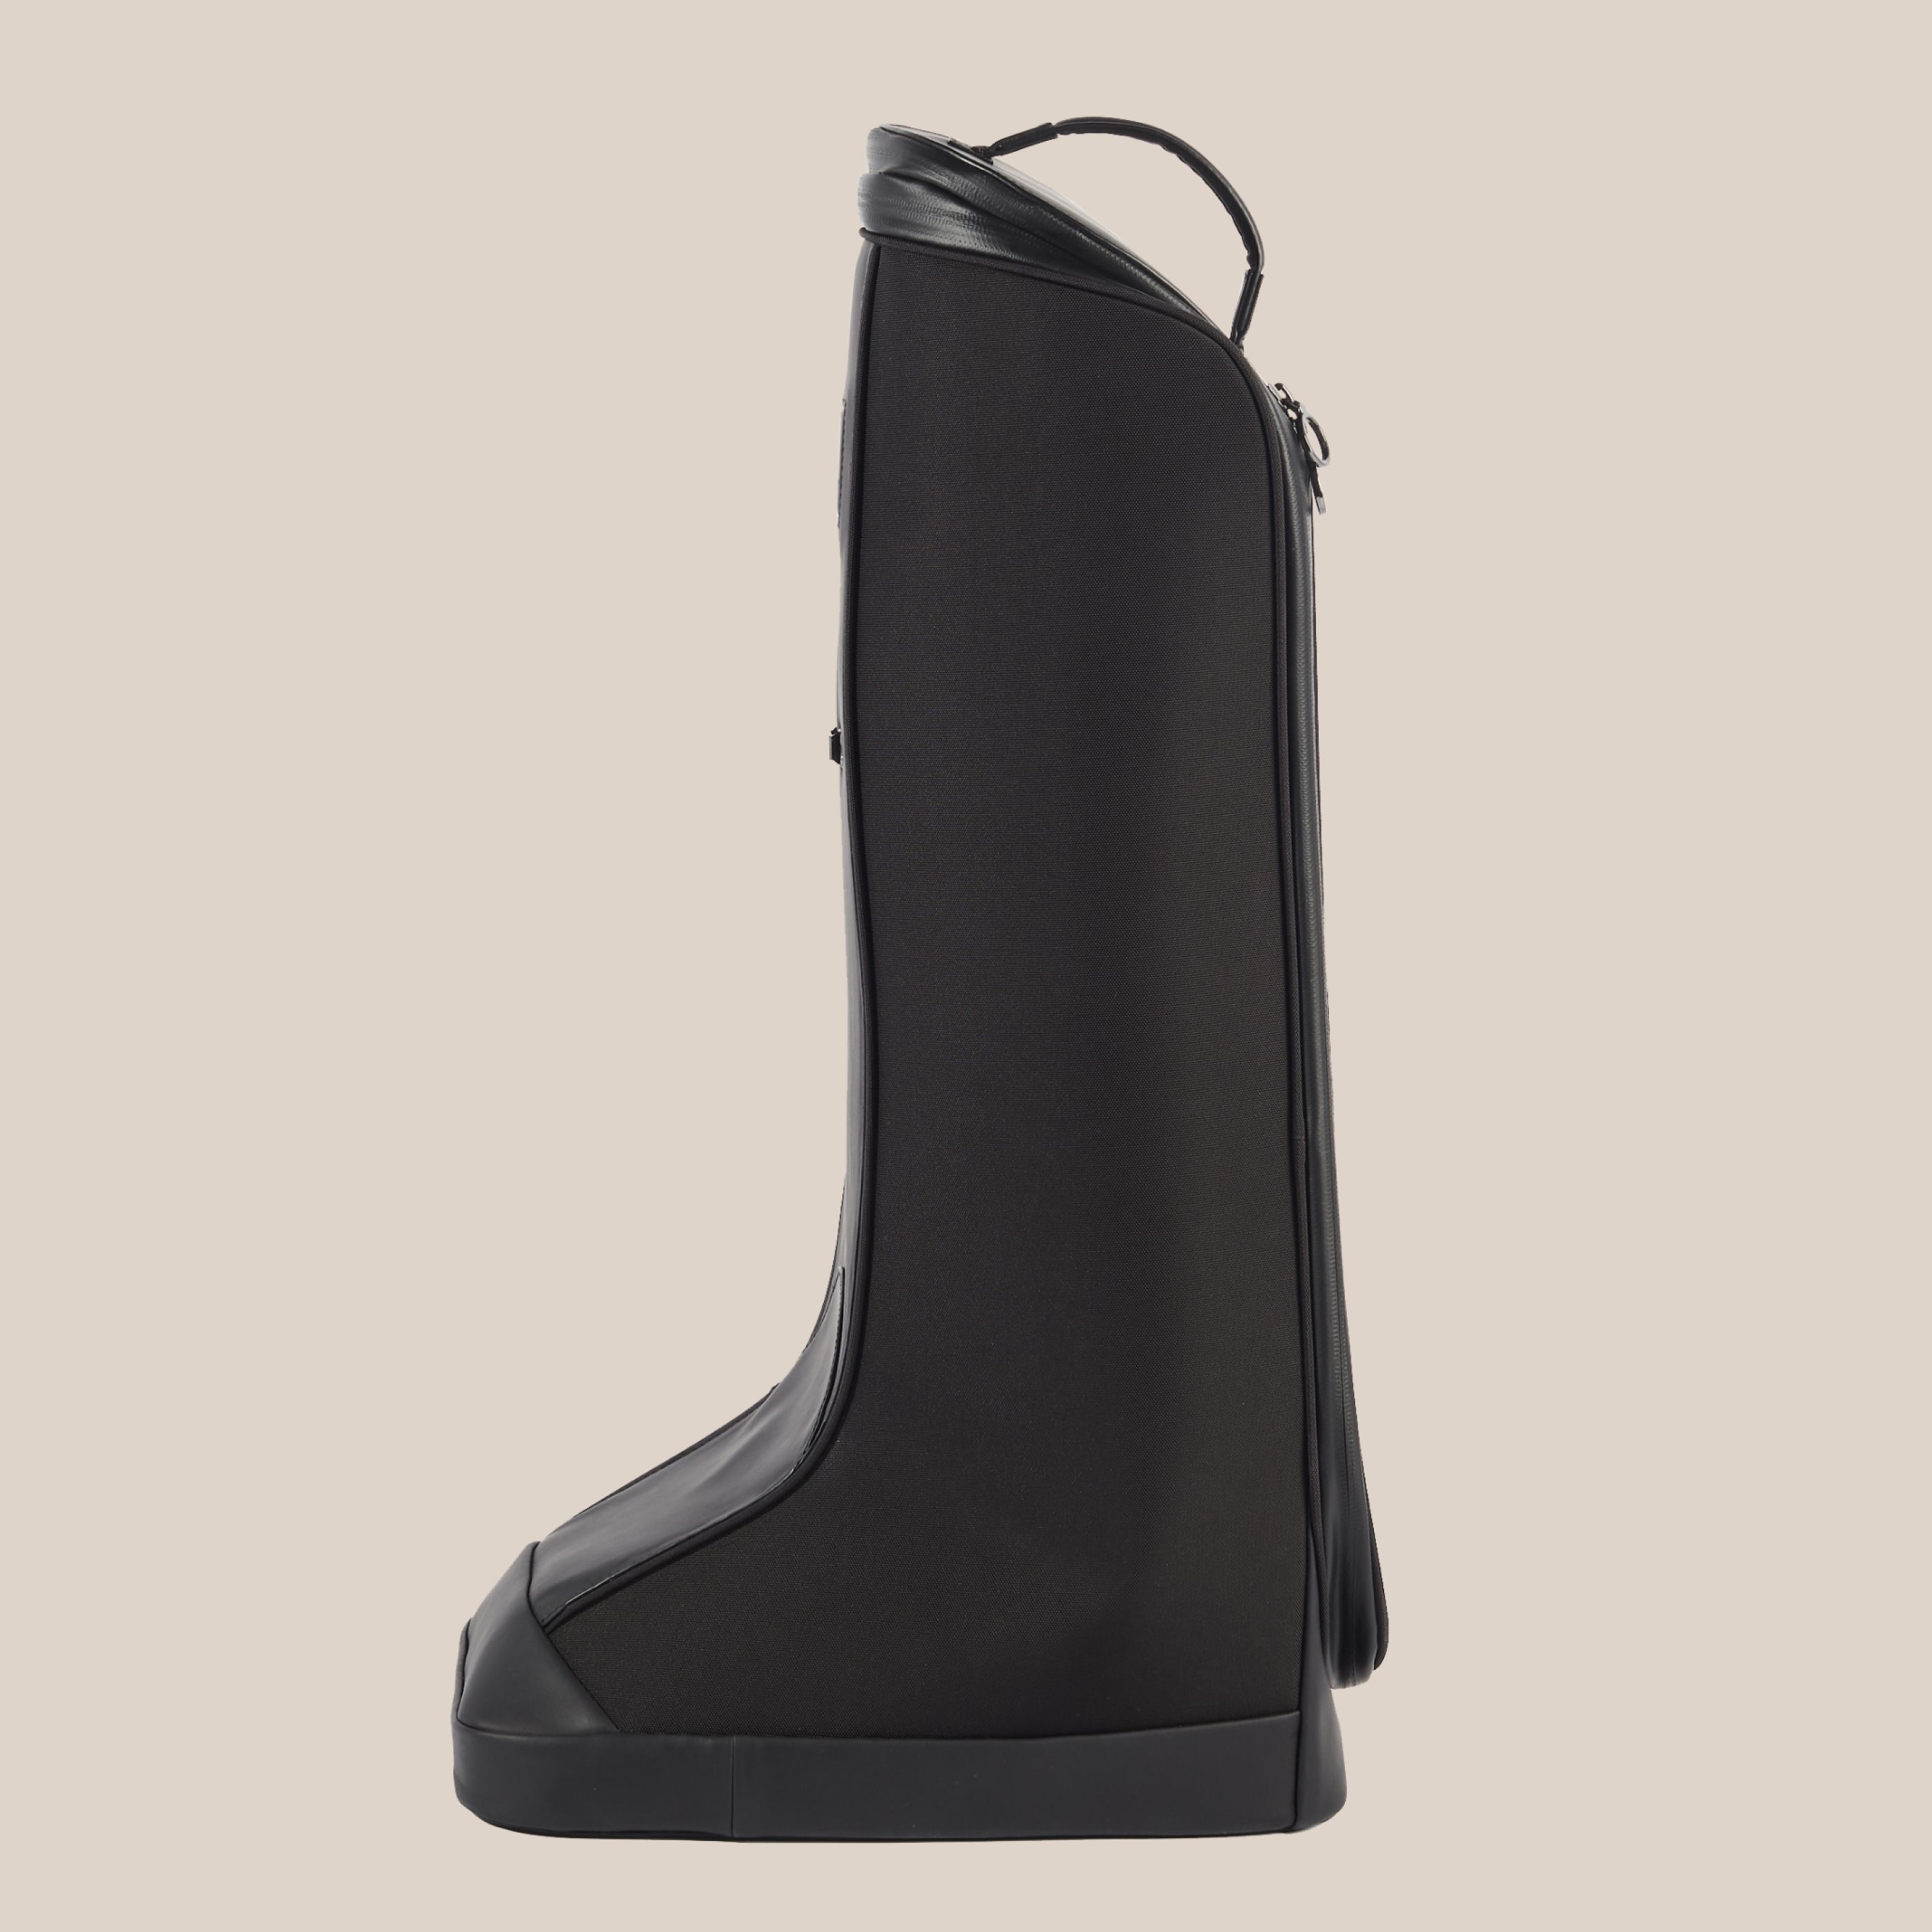 horse riding boot bag in black leather